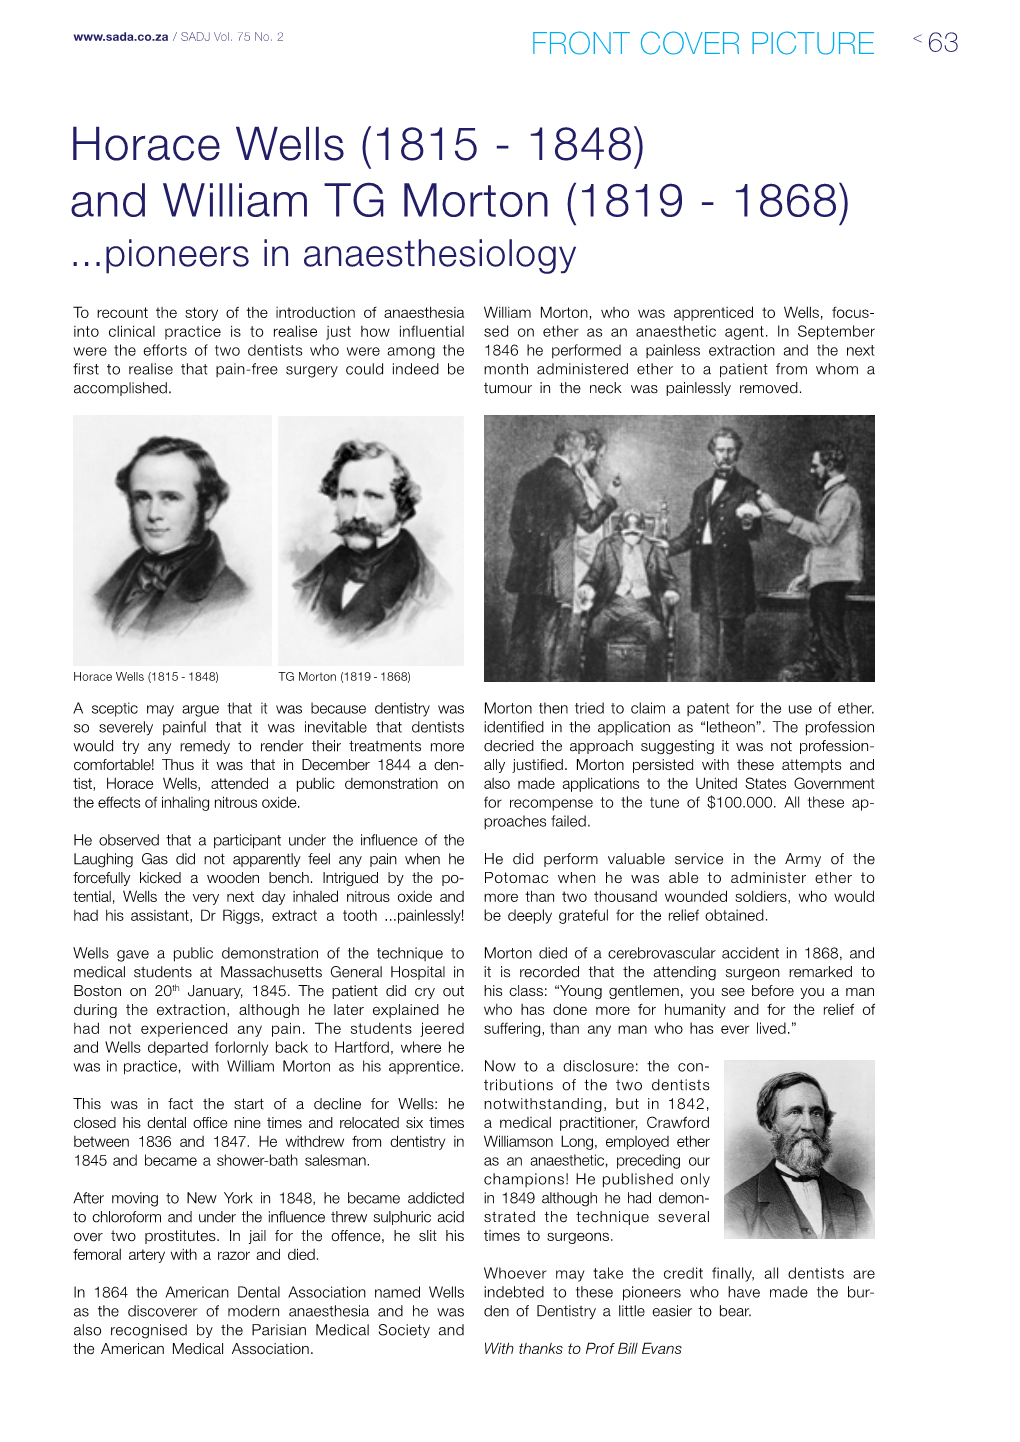 Horace Wells (1815 - 1848) and William TG Morton (1819 - 1868) ...Pioneers in Anaesthesiology